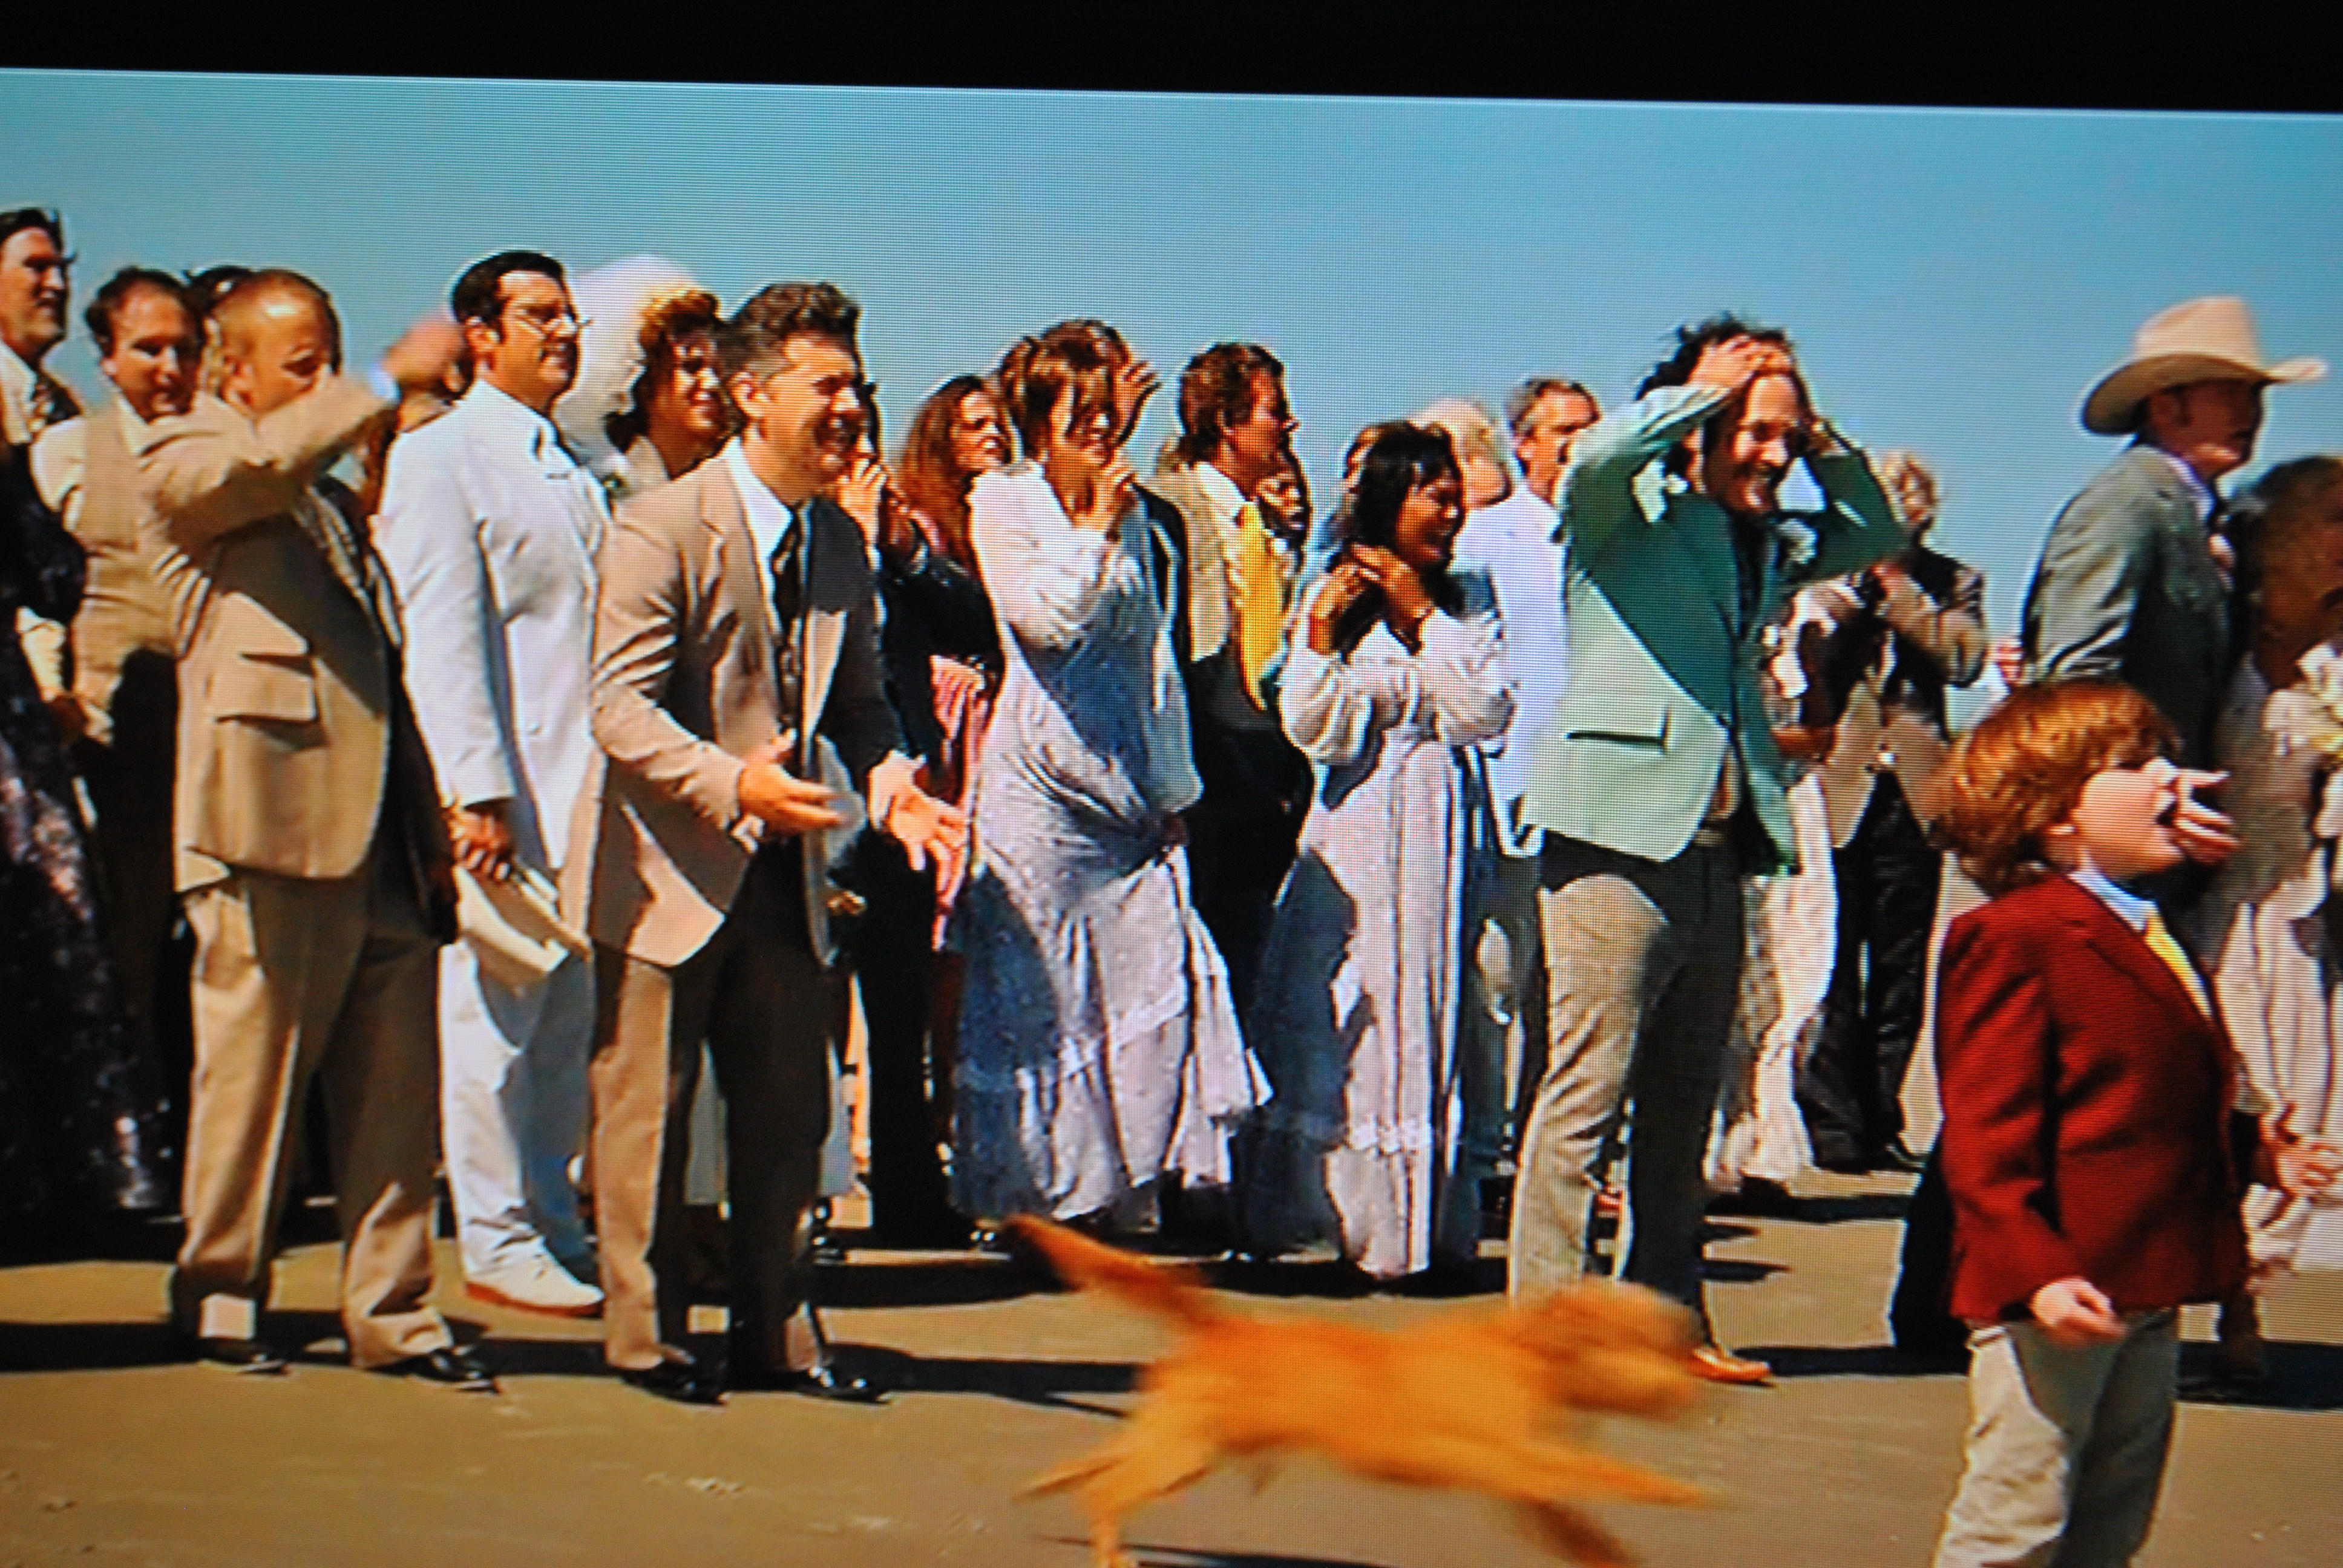 anchorman 2 the legend continues extra beach wedding scene - middle of screen I'm in the yellow tie